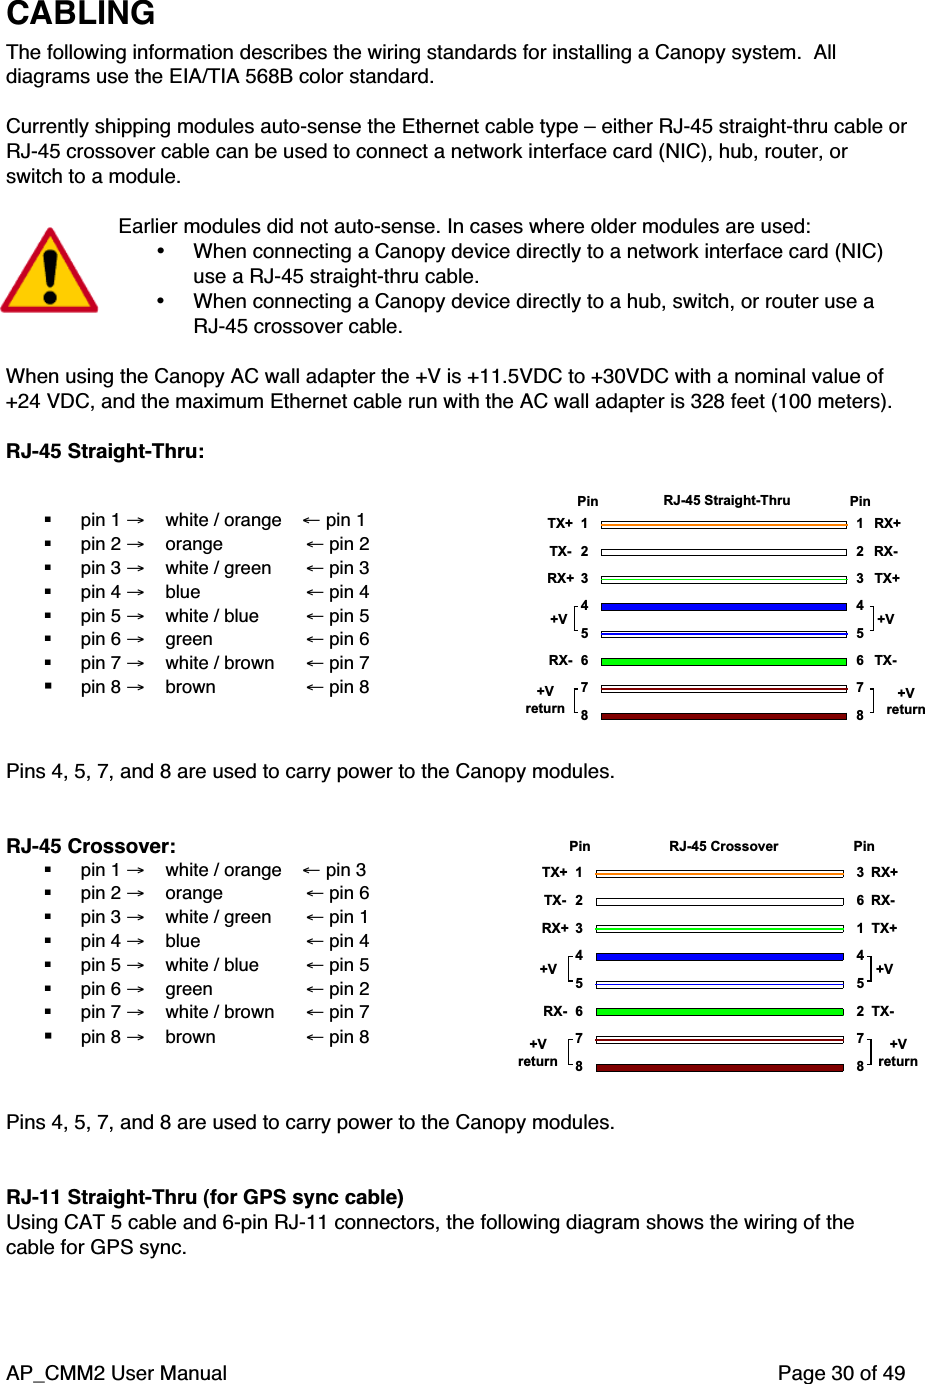 AP_CMM2 User Manual Page 30 of 49CABLINGThe following information describes the wiring standards for installing a Canopy system.  Alldiagrams use the EIA/TIA 568B color standard.Currently shipping modules auto-sense the Ethernet cable type – either RJ-45 straight-thru cable orRJ-45 crossover cable can be used to connect a network interface card (NIC), hub, router, orswitch to a module.Earlier modules did not auto-sense. In cases where older modules are used:• When connecting a Canopy device directly to a network interface card (NIC)use a RJ-45 straight-thru cable.• When connecting a Canopy device directly to a hub, switch, or router use aRJ-45 crossover cable.When using the Canopy AC wall adapter the +V is +11.5VDC to +30VDC with a nominal value of+24 VDC, and the maximum Ethernet cable run with the AC wall adapter is 328 feet (100 meters).RJ-45 Straight-Thru: pin 1 →    white / orange    ← pin 1 pin 2 →    orange      ← pin 2 pin 3 →    white / green  ← pin 3 pin 4 →    blue ← pin 4 pin 5 →    white / blue ← pin 5 pin 6 →    green      ← pin 6 pin 7 →    white / brown ← pin 7 pin 8 →    brown      ← pin 81234567812345678TX+TX-RX+RX-TX+TX-RX+RX-+V+VreturnPin PinRJ-45 Straight-Thru+V+VreturnPins 4, 5, 7, and 8 are used to carry power to the Canopy modules.RJ-45 Crossover: pin 1 →    white / orange    ← pin 3 pin 2 →    orange      ← pin 6 pin 3 →    white / green  ← pin 1 pin 4 →    blue ← pin 4 pin 5 →    white / blue ← pin 5 pin 6 →    green      ← pin 2 pin 7 →    white / brown ← pin 7 pin 8 →    brown      ← pin 878TX+TX-RX+RX-36145278RX+RX-TX+TX-123456+Vreturn+V +V+VreturnPin PinRJ-45 CrossoverPins 4, 5, 7, and 8 are used to carry power to the Canopy modules.RJ-11 Straight-Thru (for GPS sync cable)Using CAT 5 cable and 6-pin RJ-11 connectors, the following diagram shows the wiring of thecable for GPS sync.